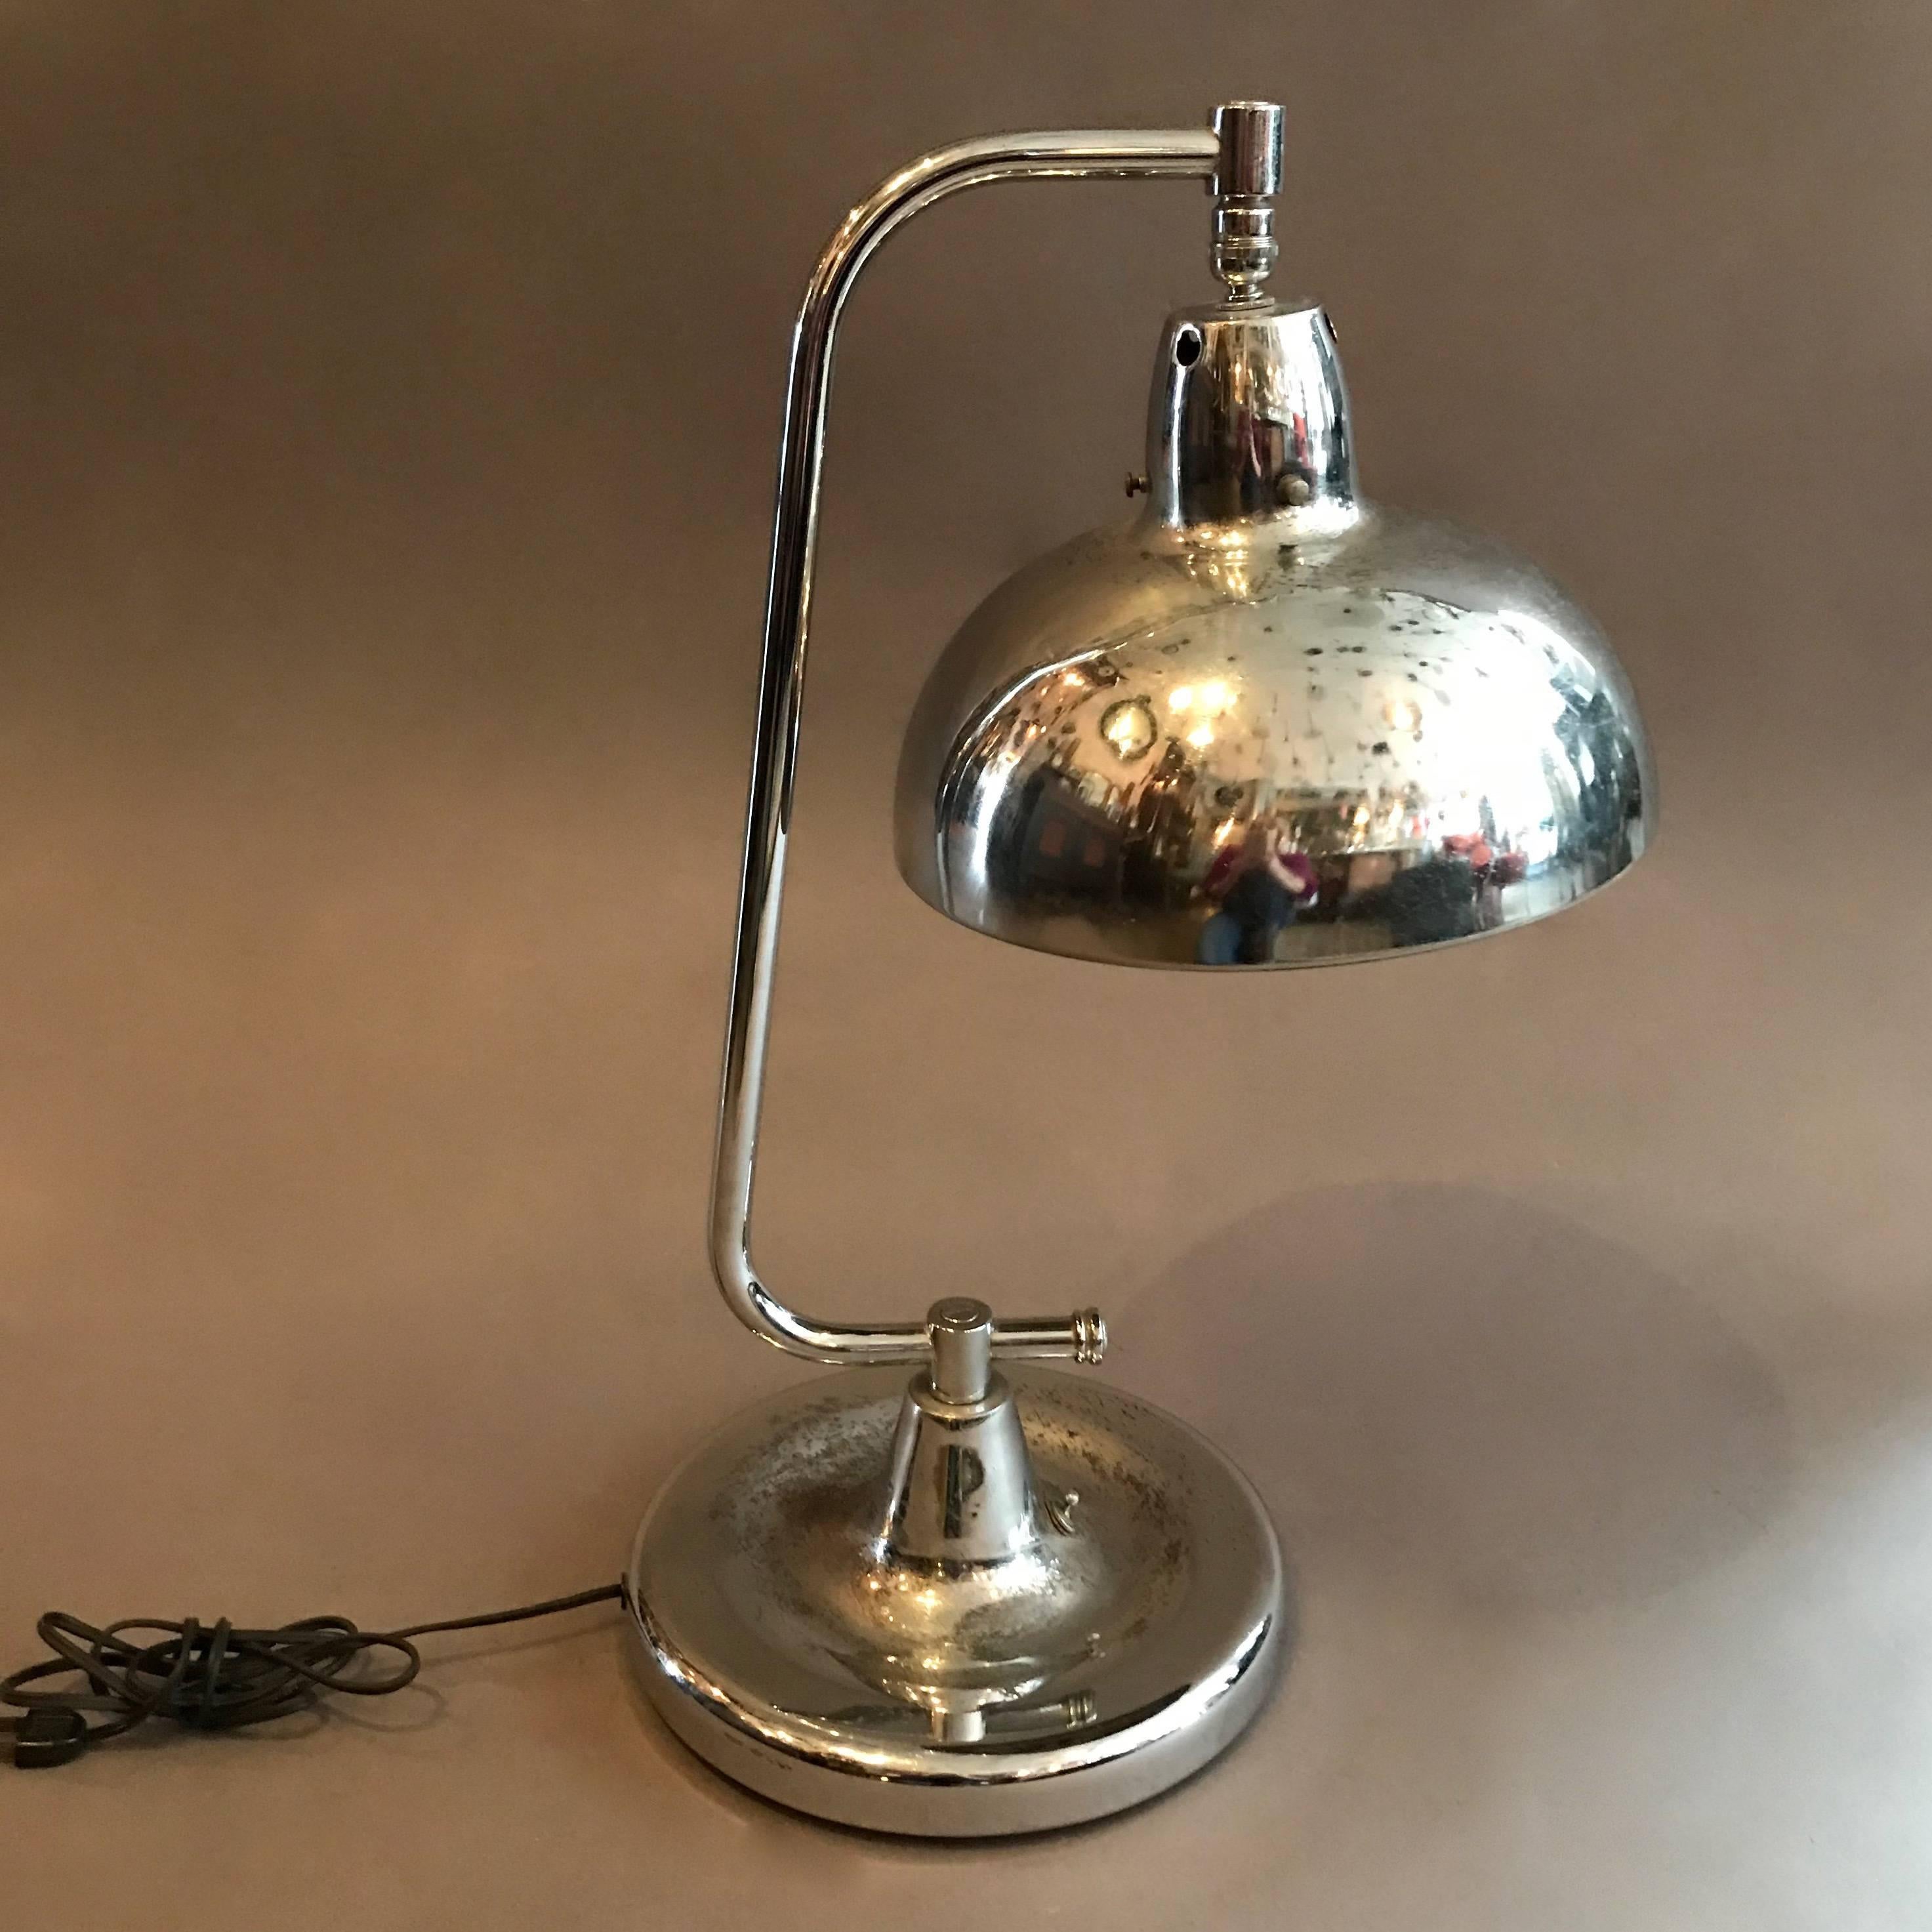 Chrome jeweler's table lamp by Apollo features an articulating shade is newly wired to accept up to a 150 watt bulb. The base is 9.5 inches diameter. We have a second one listed separately.